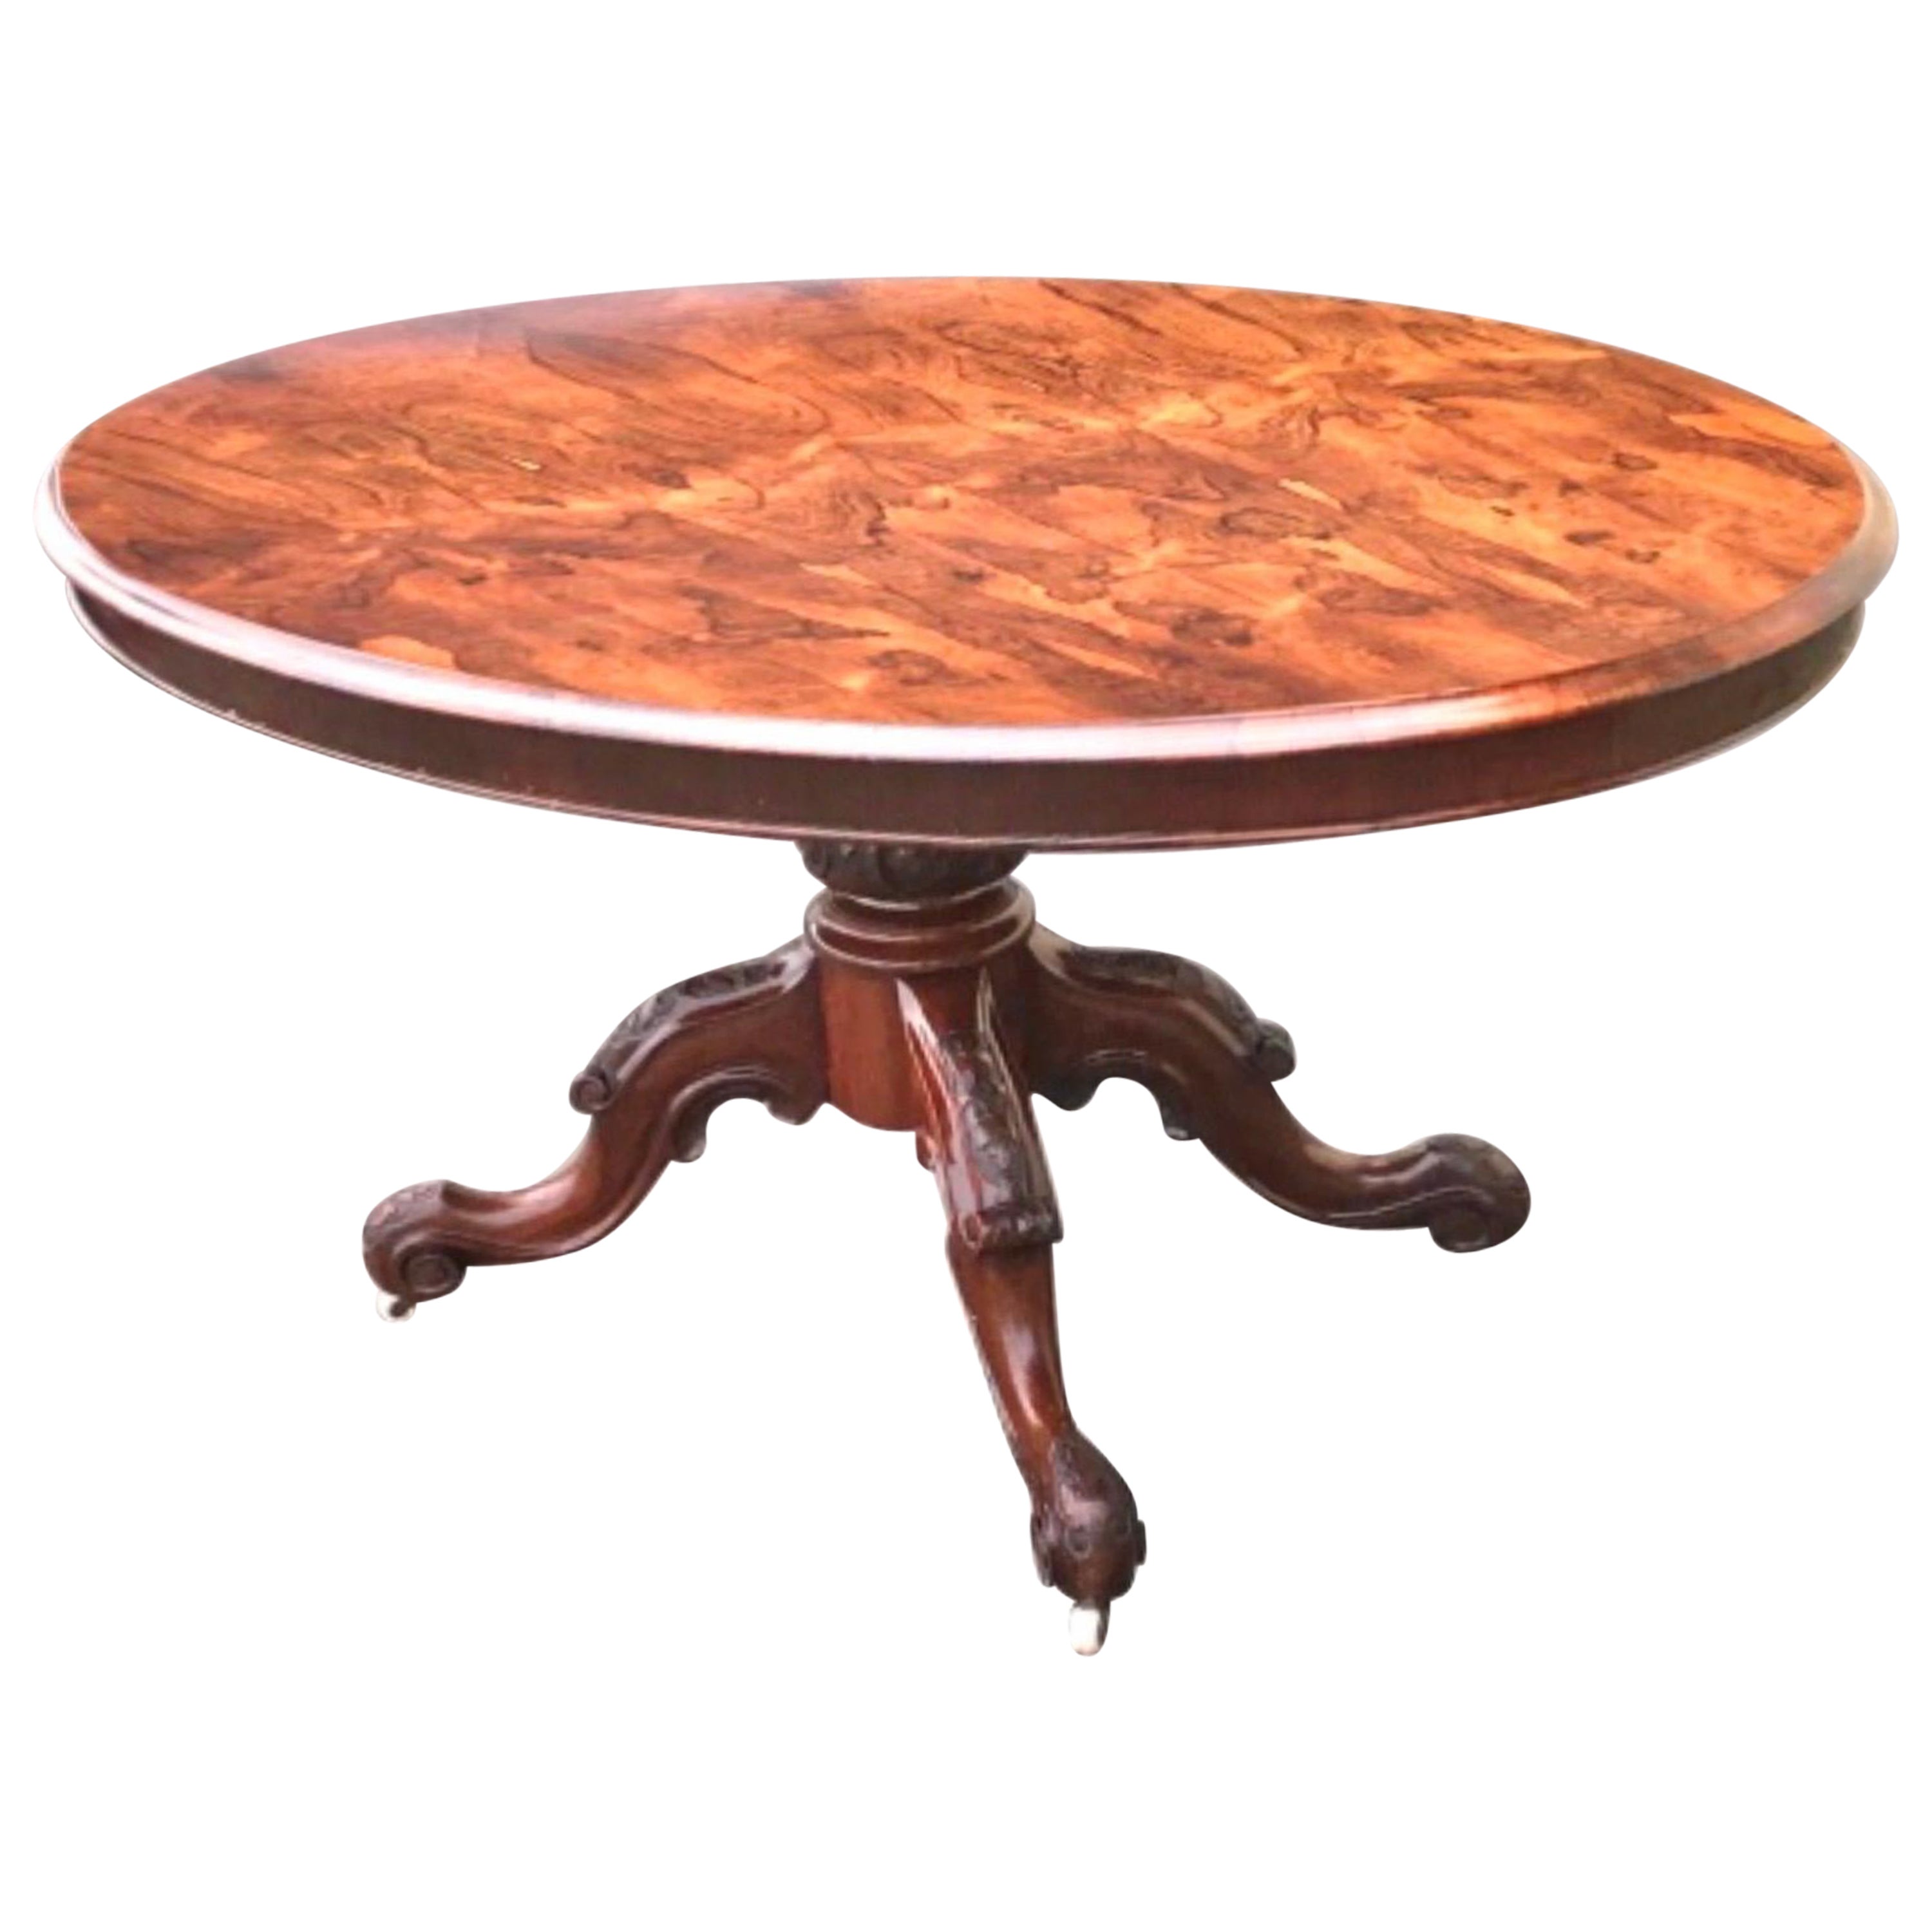 Antique Early Victorian Oval Rosewood Centre Pedestal Hall, Breakfast Loo Table